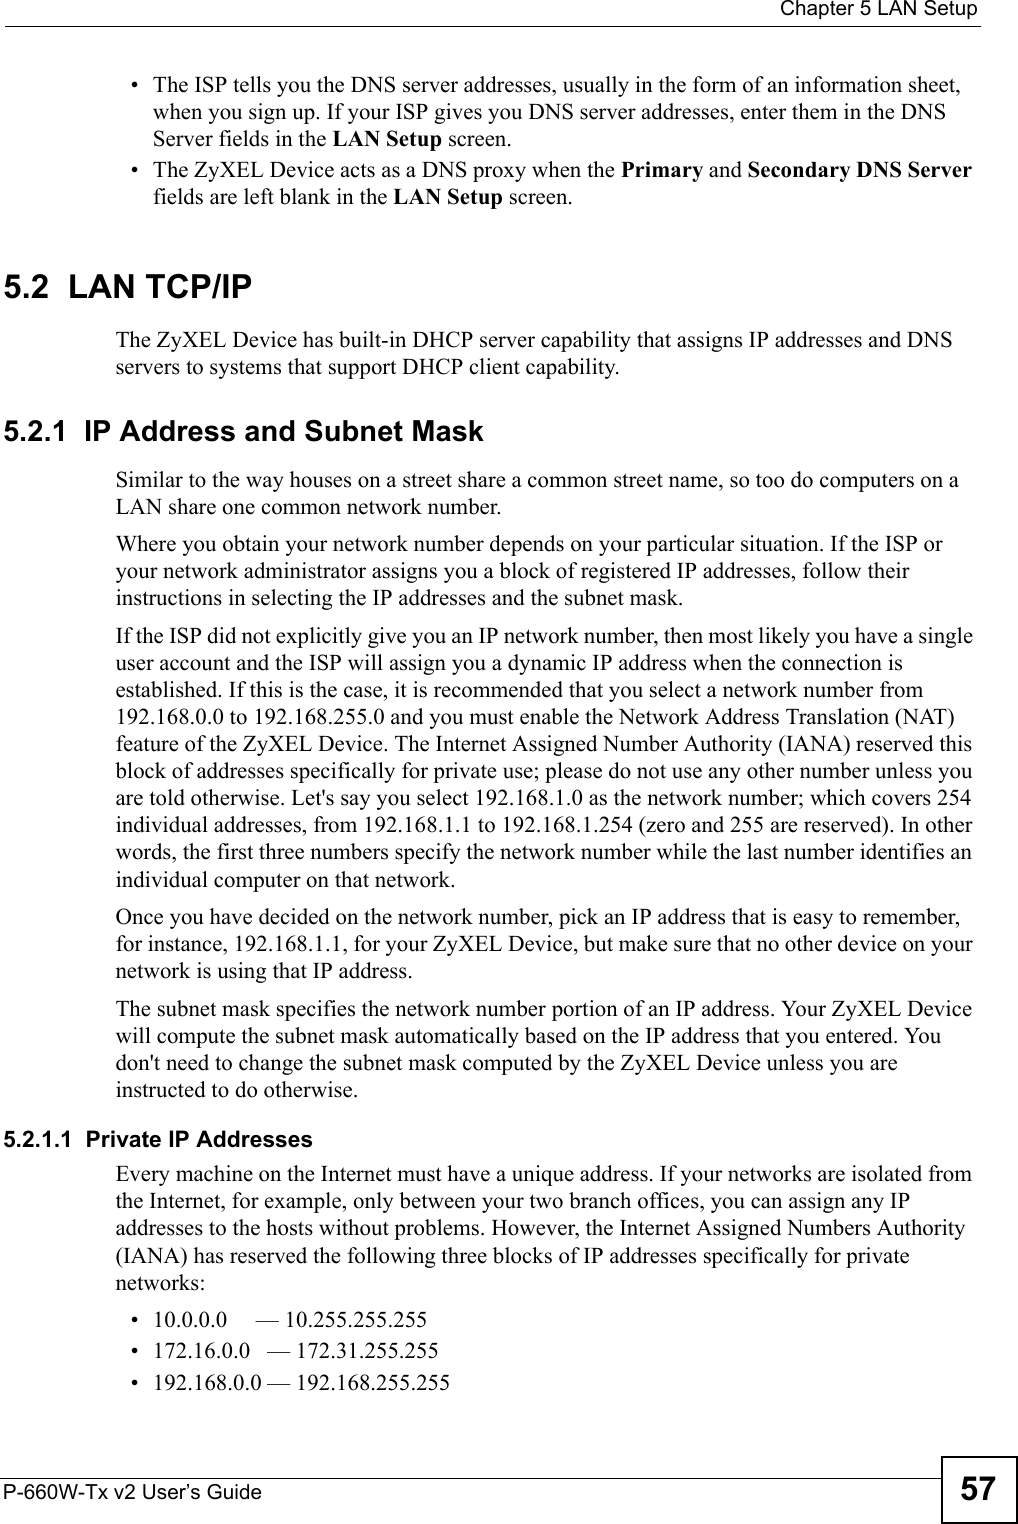  Chapter 5 LAN SetupP-660W-Tx v2 User’s Guide 57• The ISP tells you the DNS server addresses, usually in the form of an information sheet, when you sign up. If your ISP gives you DNS server addresses, enter them in the DNS Server fields in the LAN Setup screen.• The ZyXEL Device acts as a DNS proxy when the Primary and Secondary DNS Server fields are left blank in the LAN Setup screen.5.2  LAN TCP/IP The ZyXEL Device has built-in DHCP server capability that assigns IP addresses and DNS servers to systems that support DHCP client capability.5.2.1  IP Address and Subnet MaskSimilar to the way houses on a street share a common street name, so too do computers on a LAN share one common network number.Where you obtain your network number depends on your particular situation. If the ISP or your network administrator assigns you a block of registered IP addresses, follow their instructions in selecting the IP addresses and the subnet mask.If the ISP did not explicitly give you an IP network number, then most likely you have a single user account and the ISP will assign you a dynamic IP address when the connection is established. If this is the case, it is recommended that you select a network number from 192.168.0.0 to 192.168.255.0 and you must enable the Network Address Translation (NAT) feature of the ZyXEL Device. The Internet Assigned Number Authority (IANA) reserved this block of addresses specifically for private use; please do not use any other number unless you are told otherwise. Let&apos;s say you select 192.168.1.0 as the network number; which covers 254 individual addresses, from 192.168.1.1 to 192.168.1.254 (zero and 255 are reserved). In other words, the first three numbers specify the network number while the last number identifies an individual computer on that network.Once you have decided on the network number, pick an IP address that is easy to remember, for instance, 192.168.1.1, for your ZyXEL Device, but make sure that no other device on your network is using that IP address.The subnet mask specifies the network number portion of an IP address. Your ZyXEL Device will compute the subnet mask automatically based on the IP address that you entered. You don&apos;t need to change the subnet mask computed by the ZyXEL Device unless you are instructed to do otherwise.5.2.1.1  Private IP AddressesEvery machine on the Internet must have a unique address. If your networks are isolated from the Internet, for example, only between your two branch offices, you can assign any IP addresses to the hosts without problems. However, the Internet Assigned Numbers Authority (IANA) has reserved the following three blocks of IP addresses specifically for private networks:• 10.0.0.0     — 10.255.255.255• 172.16.0.0   — 172.31.255.255• 192.168.0.0 — 192.168.255.255